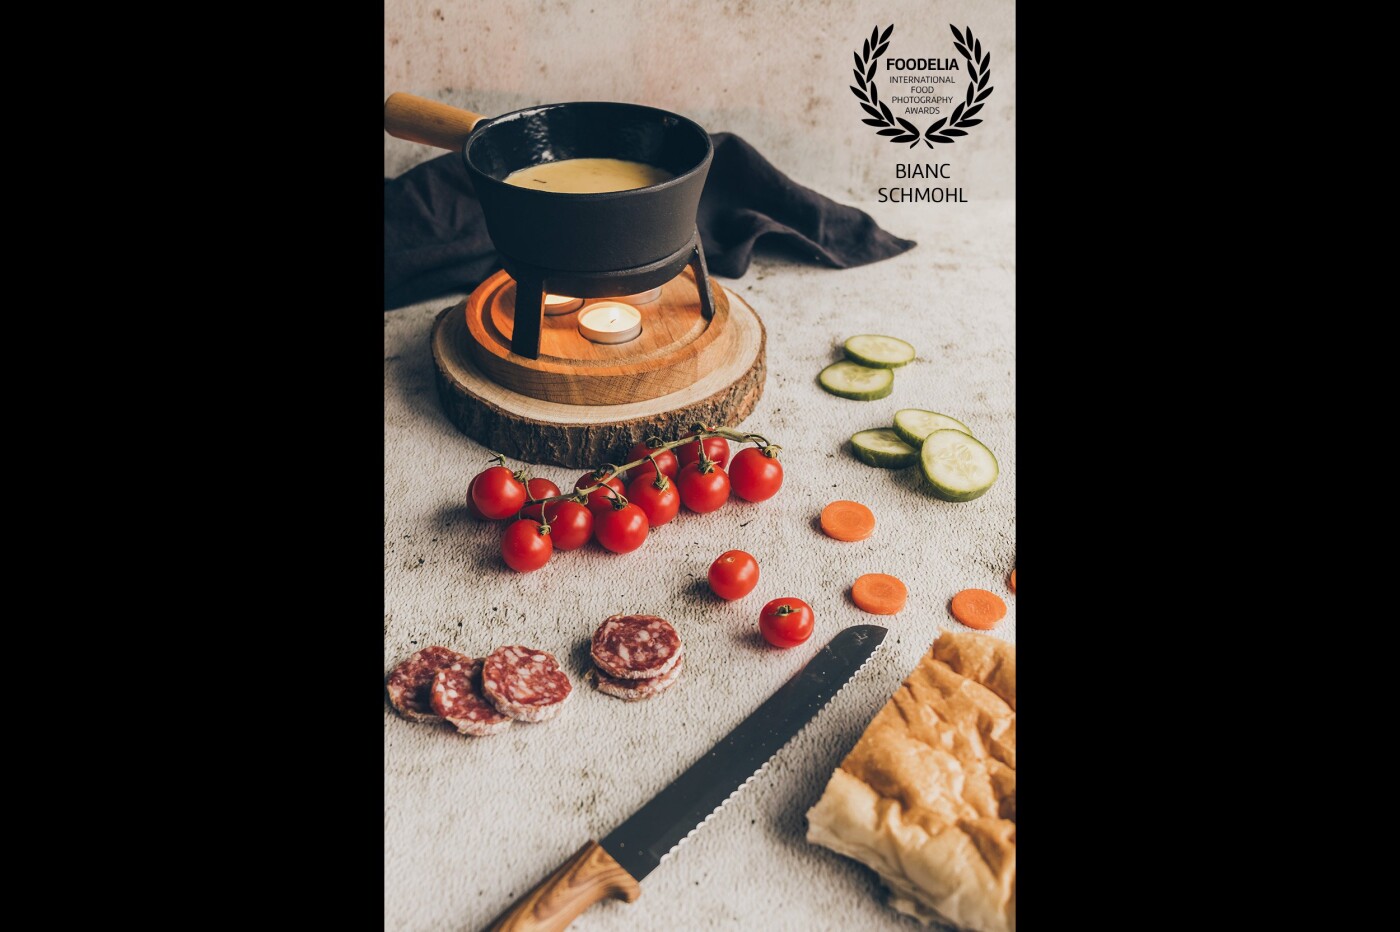 Cheese fondue allows you to pick all the ingredients you like and dip them in a delicious bowl of molten cheese. As you can imagine, a colourful and atmospheric picture developes easily!